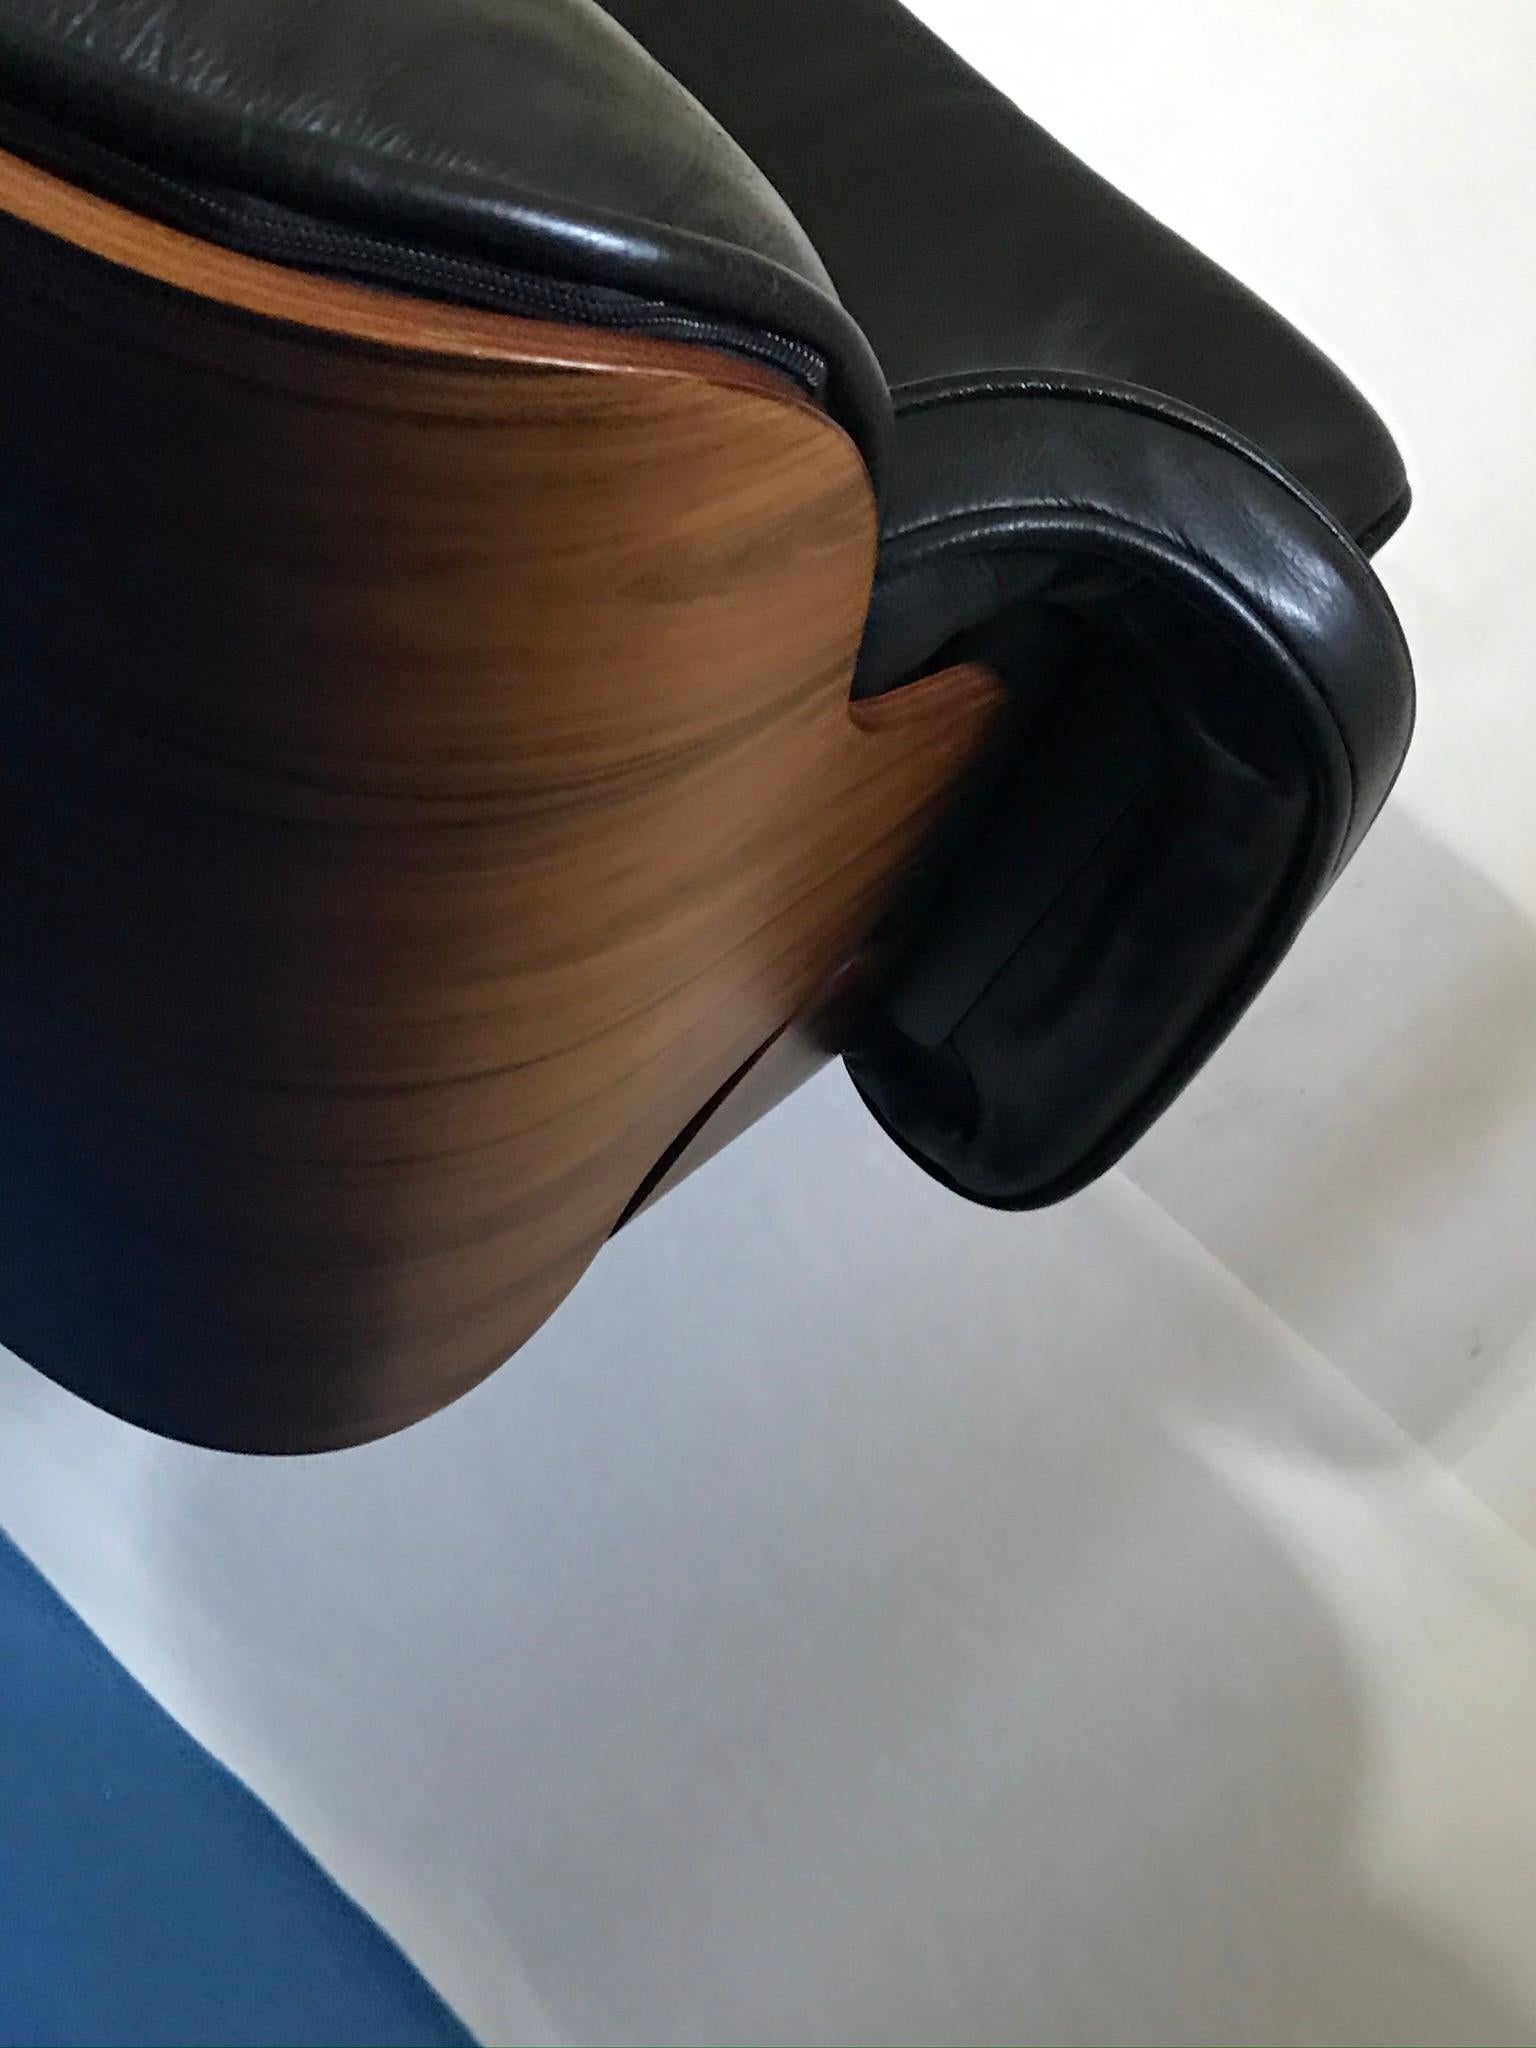 The chair from Charles Eames is made of nut wood and black leather. It is in very nice condition with original patina. A label and a designation were not preseved.